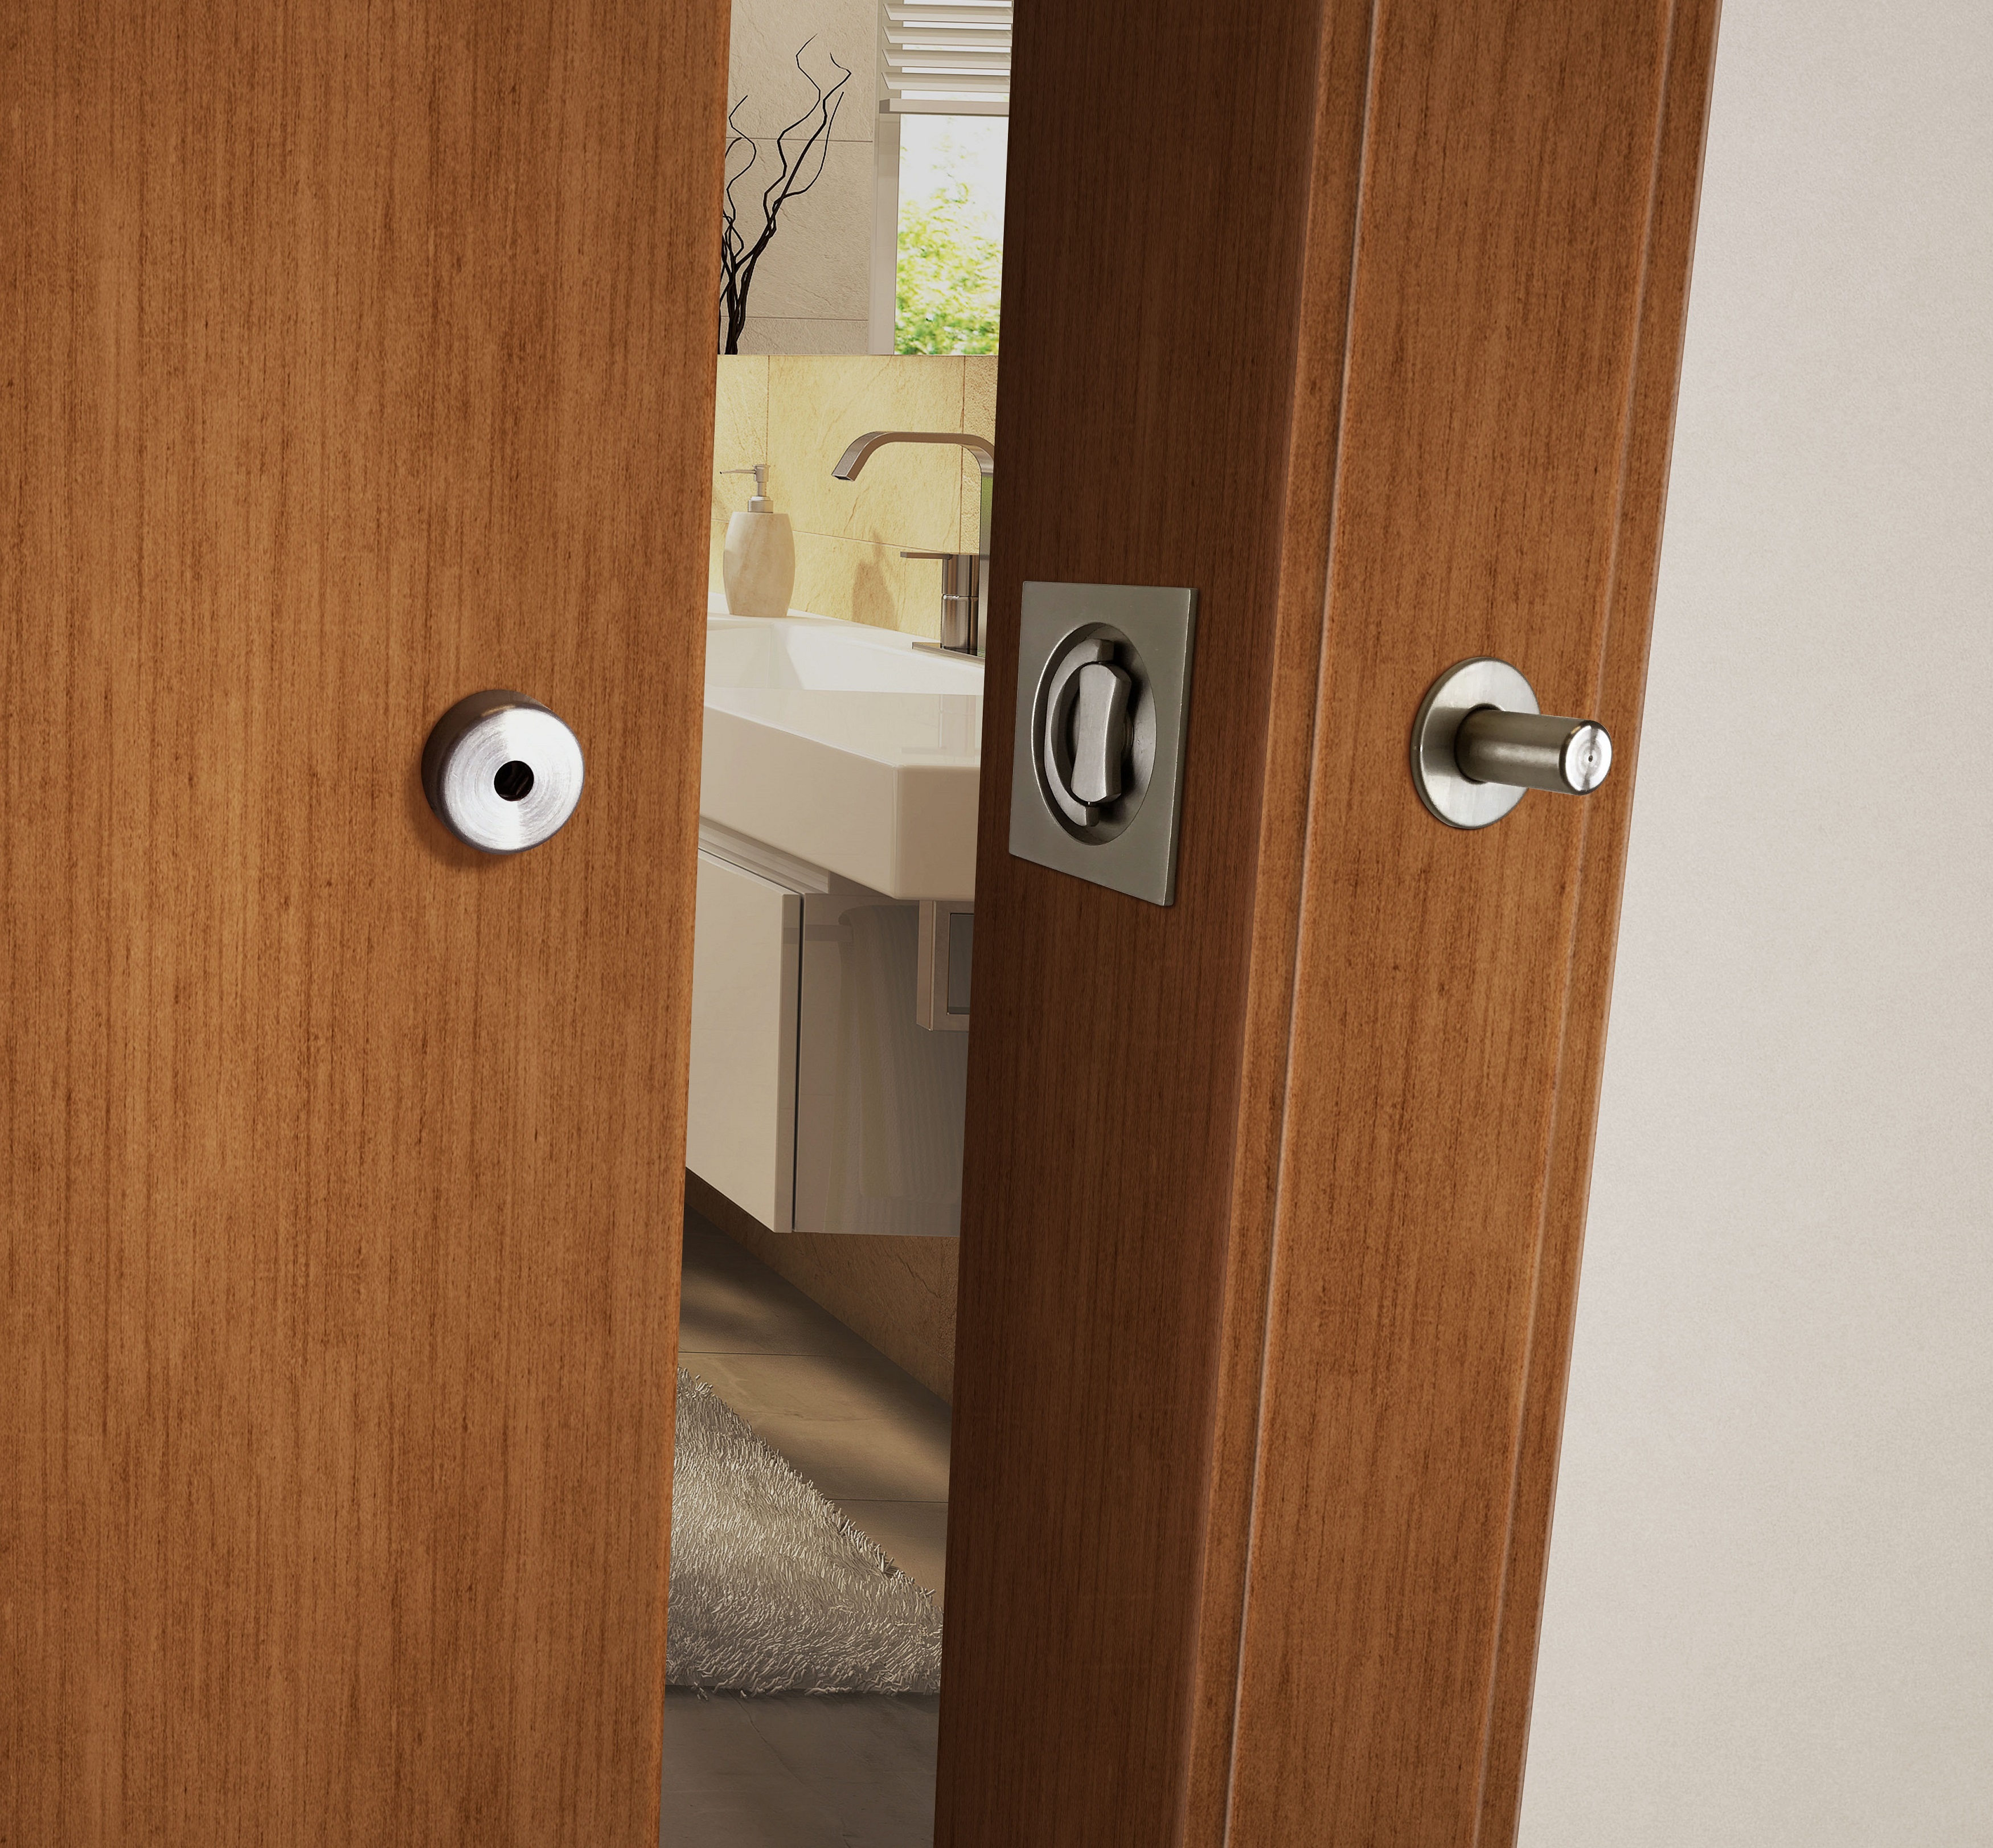 The INOX Privacy Barn Door Lock provides an easy-to-use thumb turn (with ADA options) that allows the barn door to be locked securely from inside the room. Shown: Urban in Satin Stainless Steel.